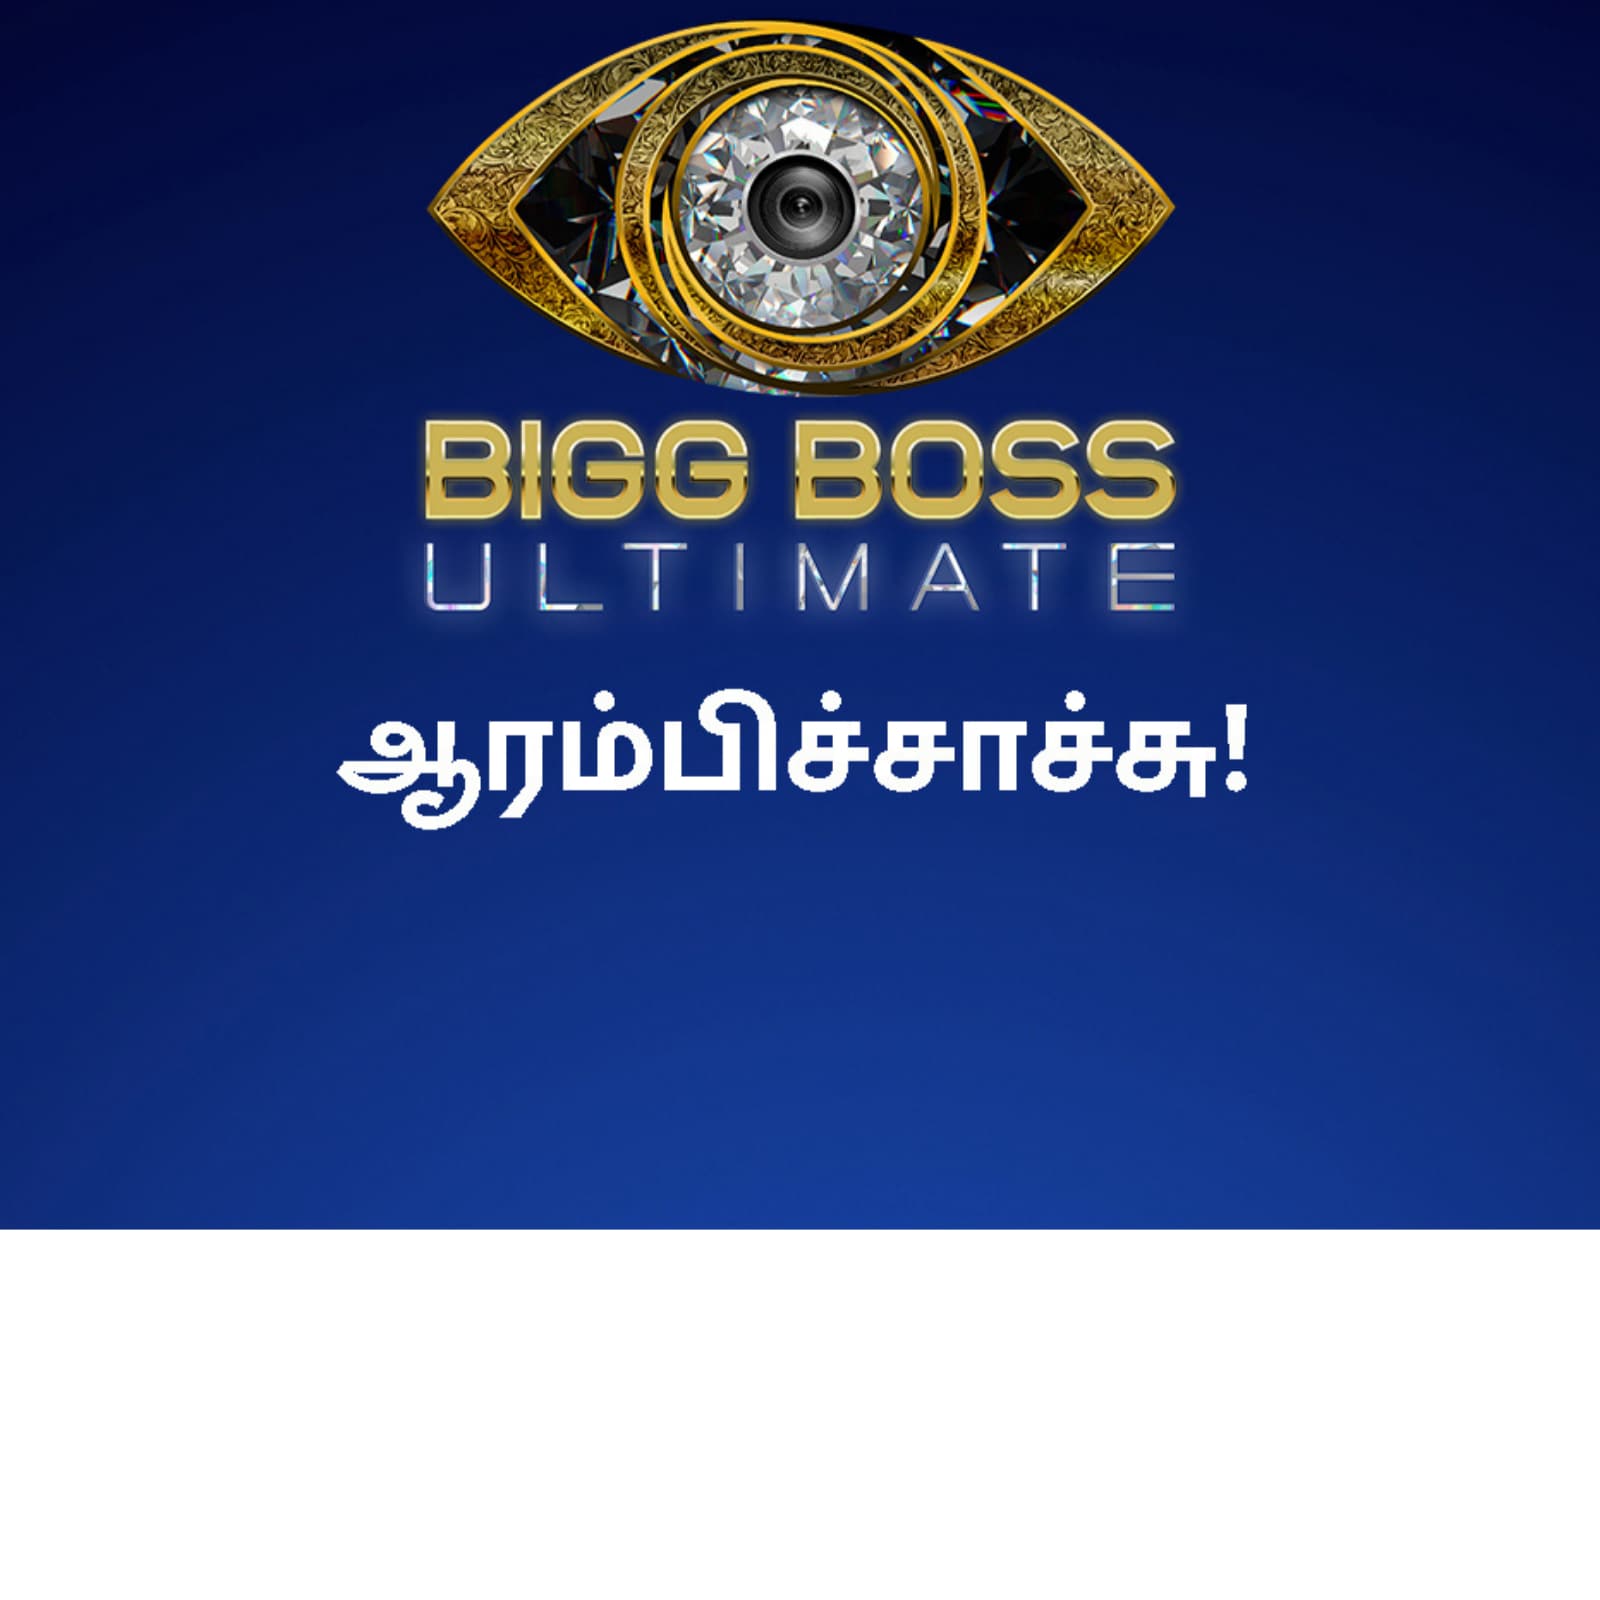 Have You Seen The Face Behind The Bigg Boss Voice? Here's A Photo! |  MissMalini